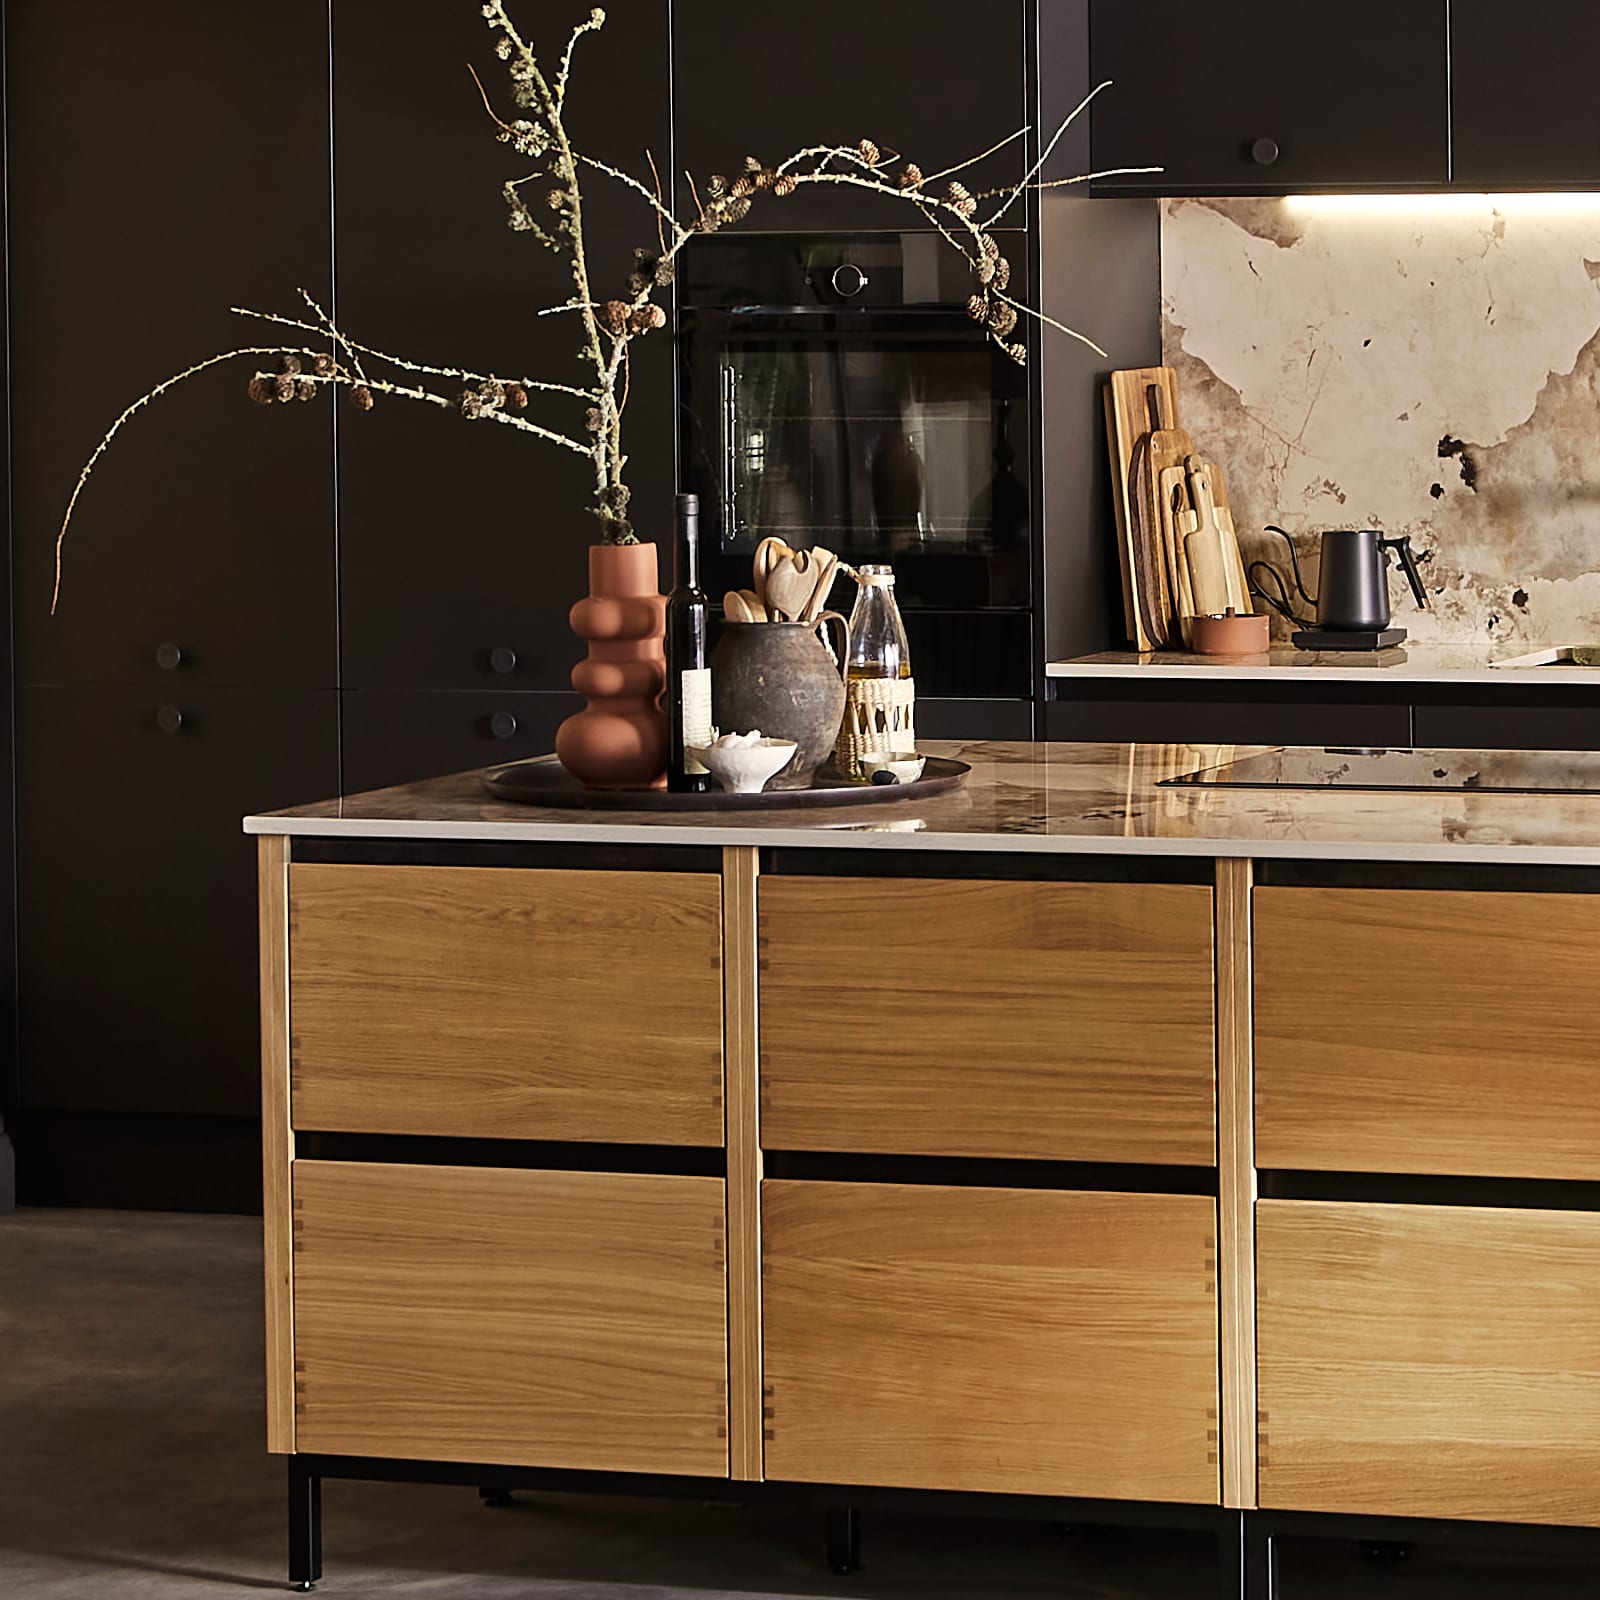 End of Nordic Craft kitchen island, with a vase holding a large branch